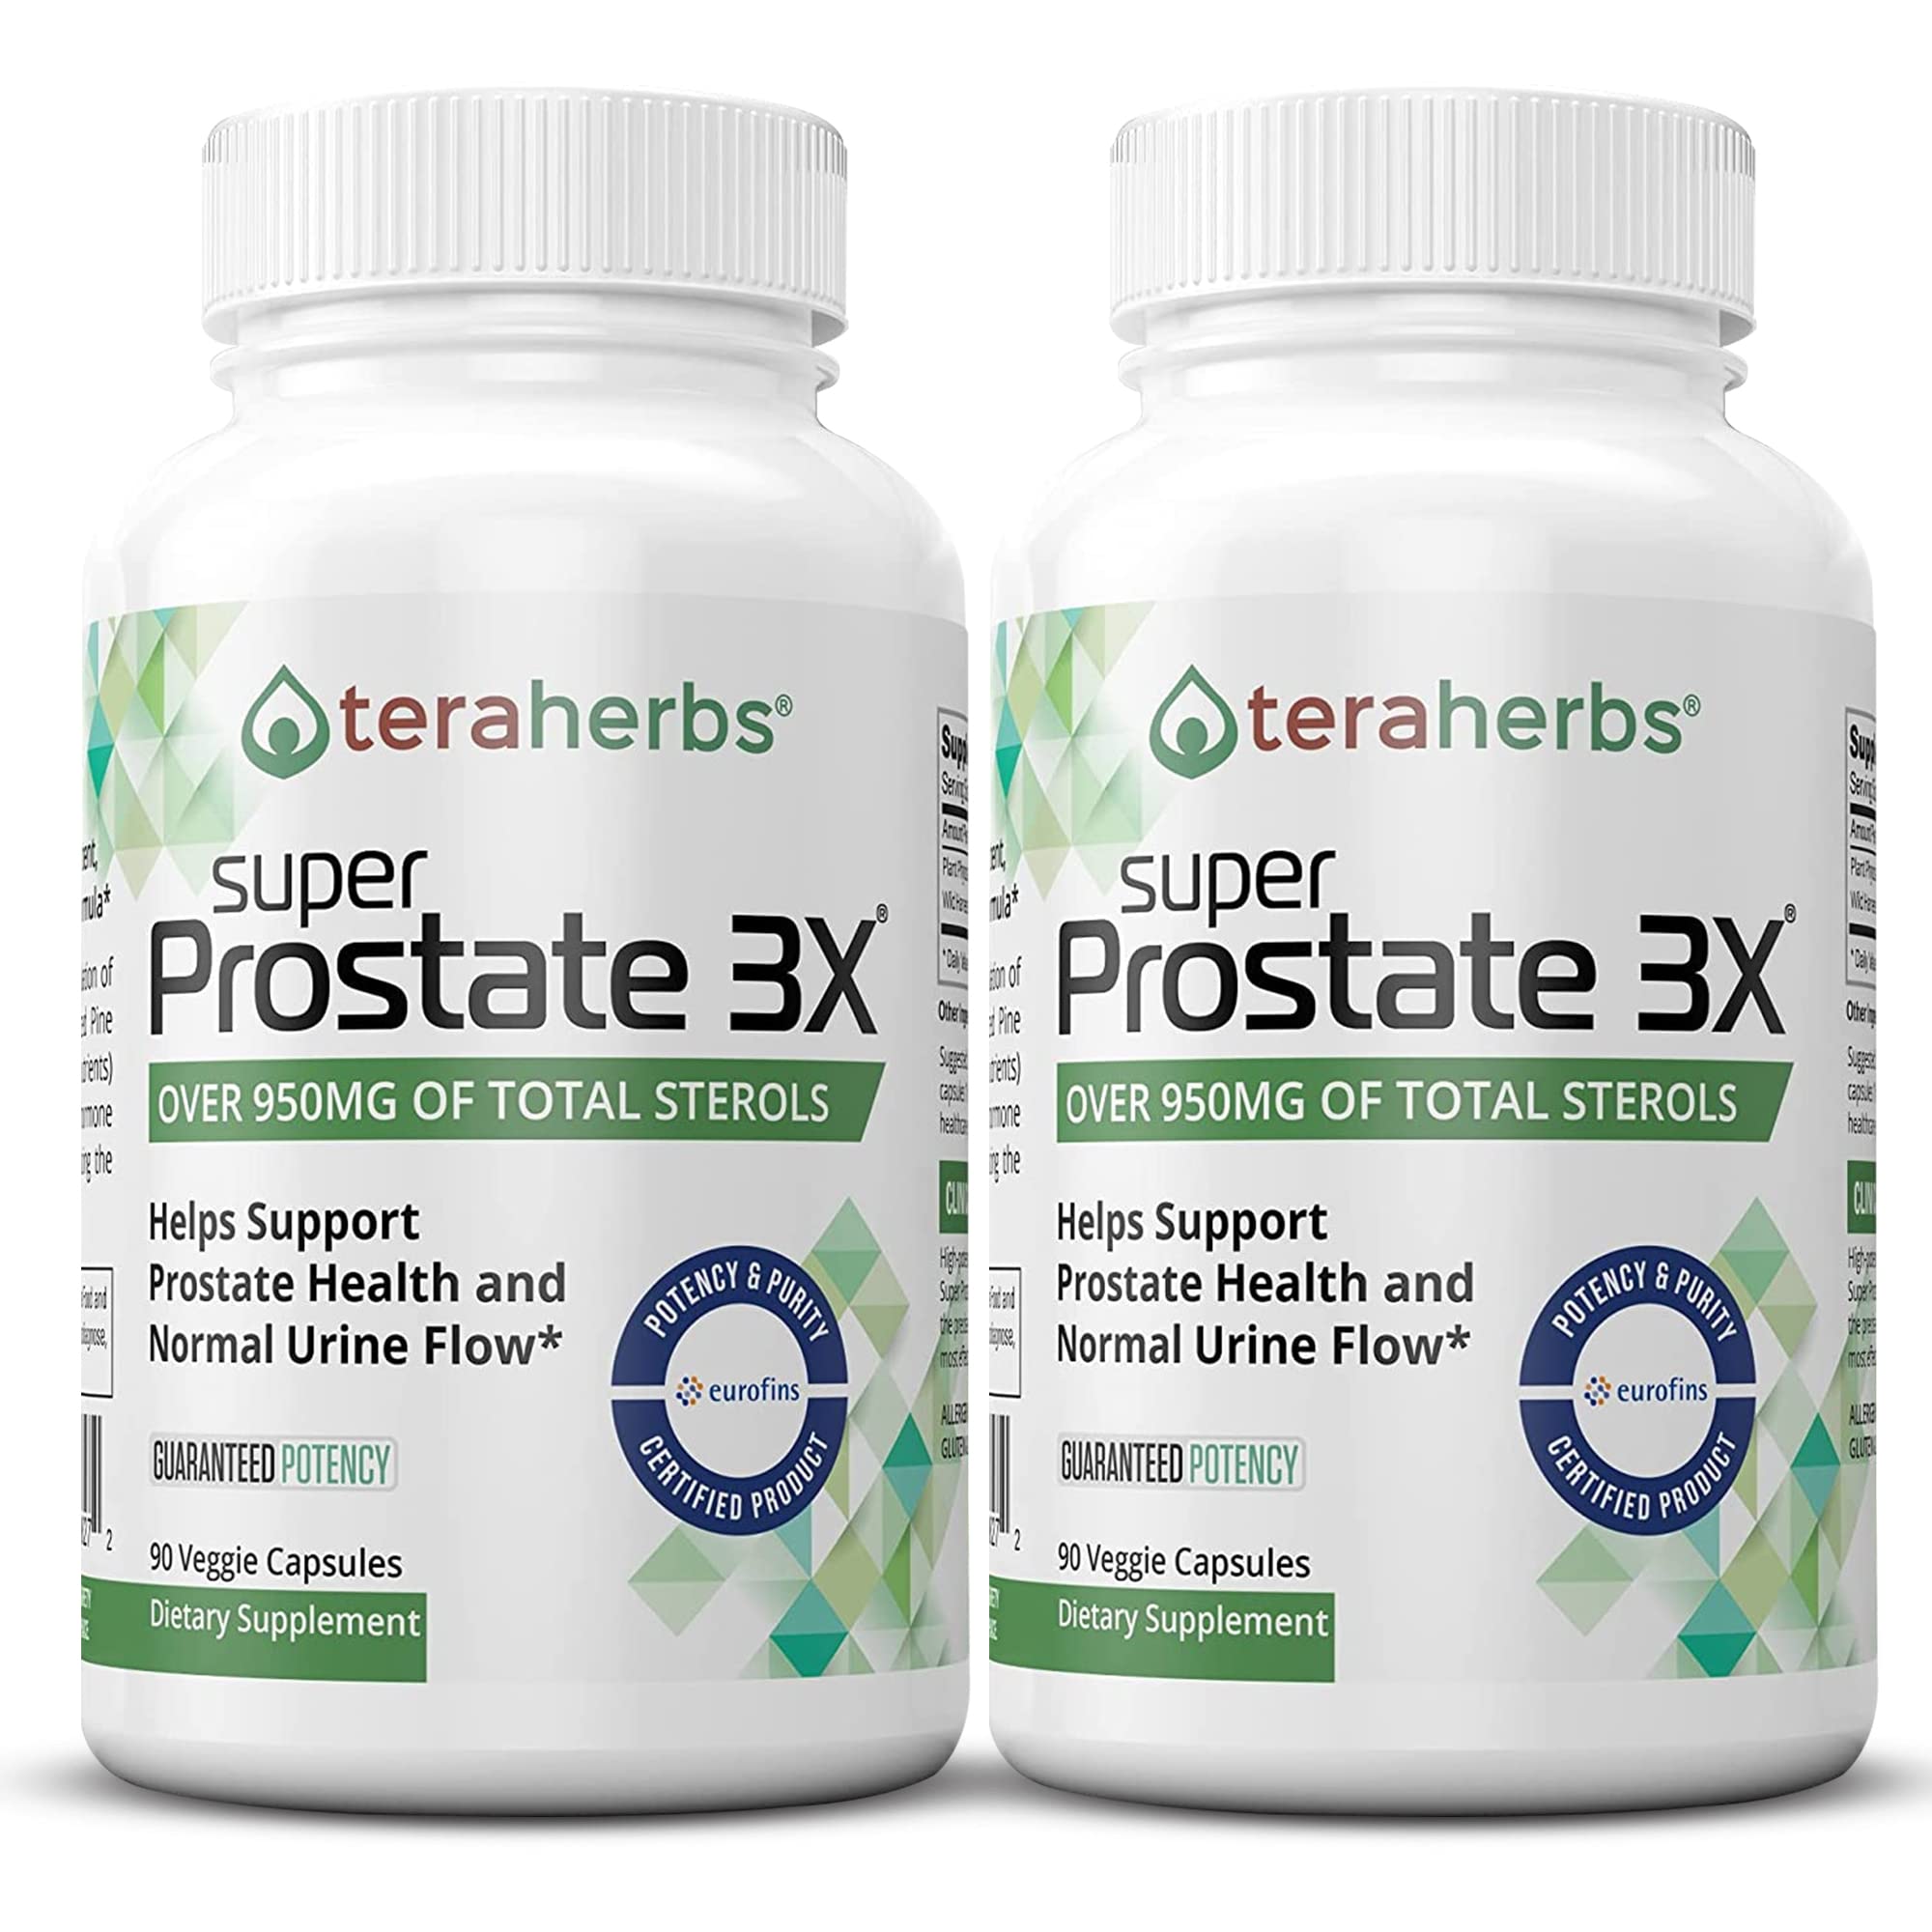 Tera Herbs Super Prostate 3X - Bladder Control, Hormone Balance & Support for Enlarged Prostate & Frequent Urination - Prostate Supplements for Men...